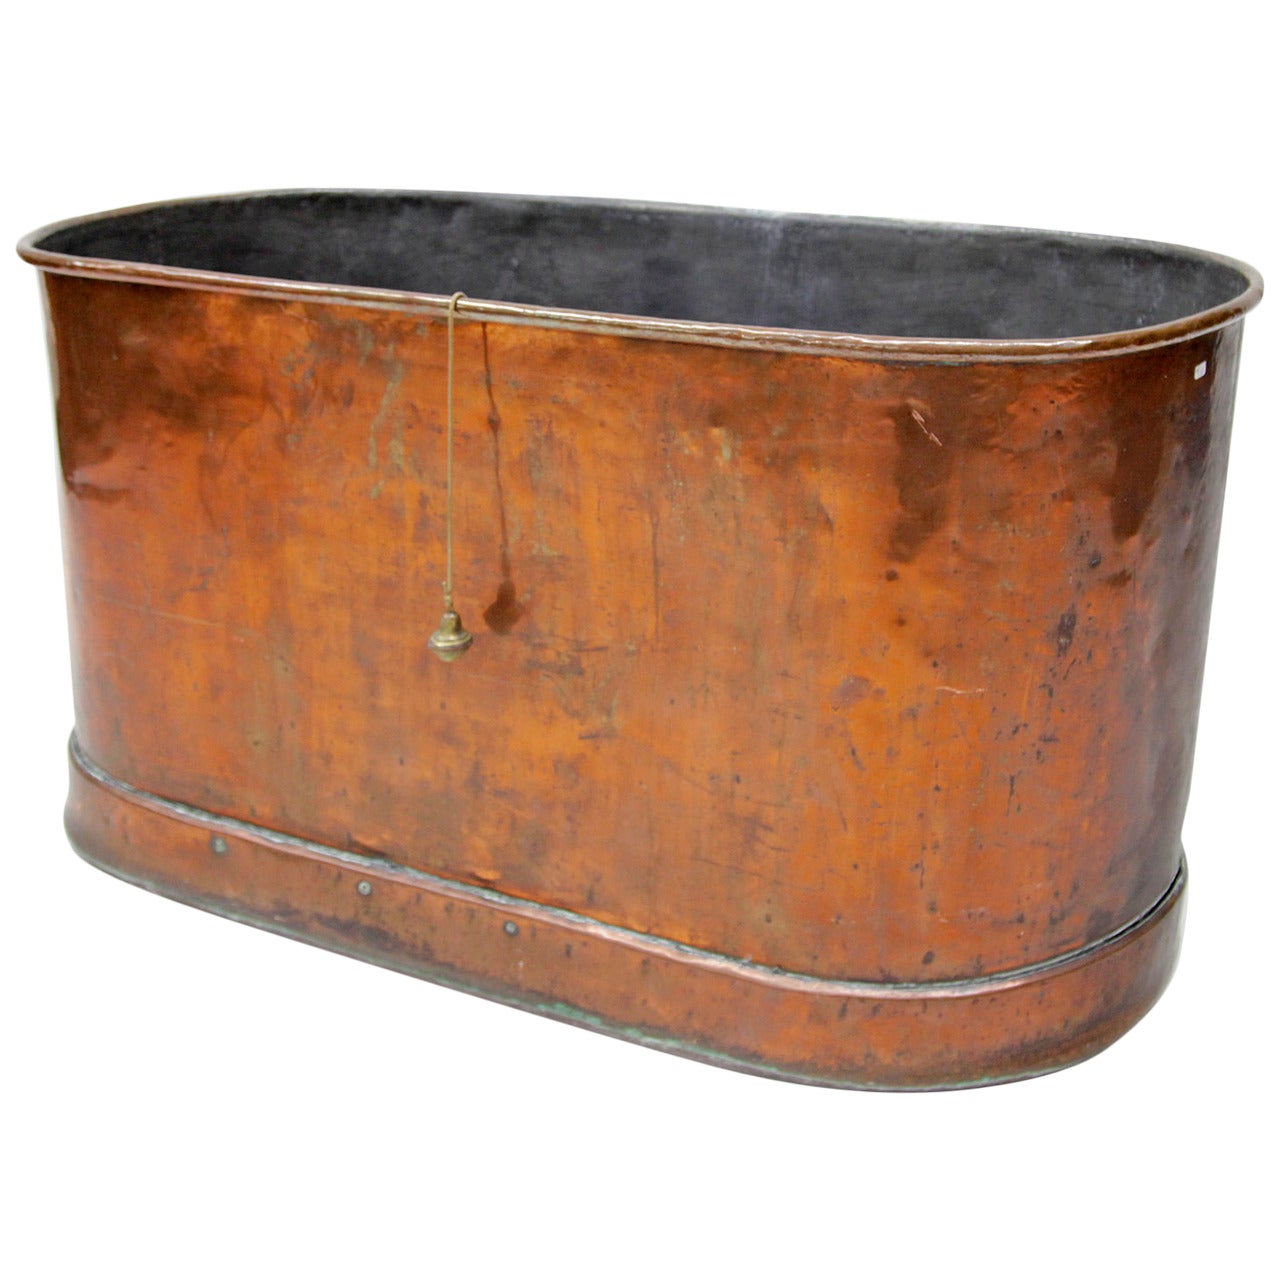 French Copper Bathtub from the Early 19th Century